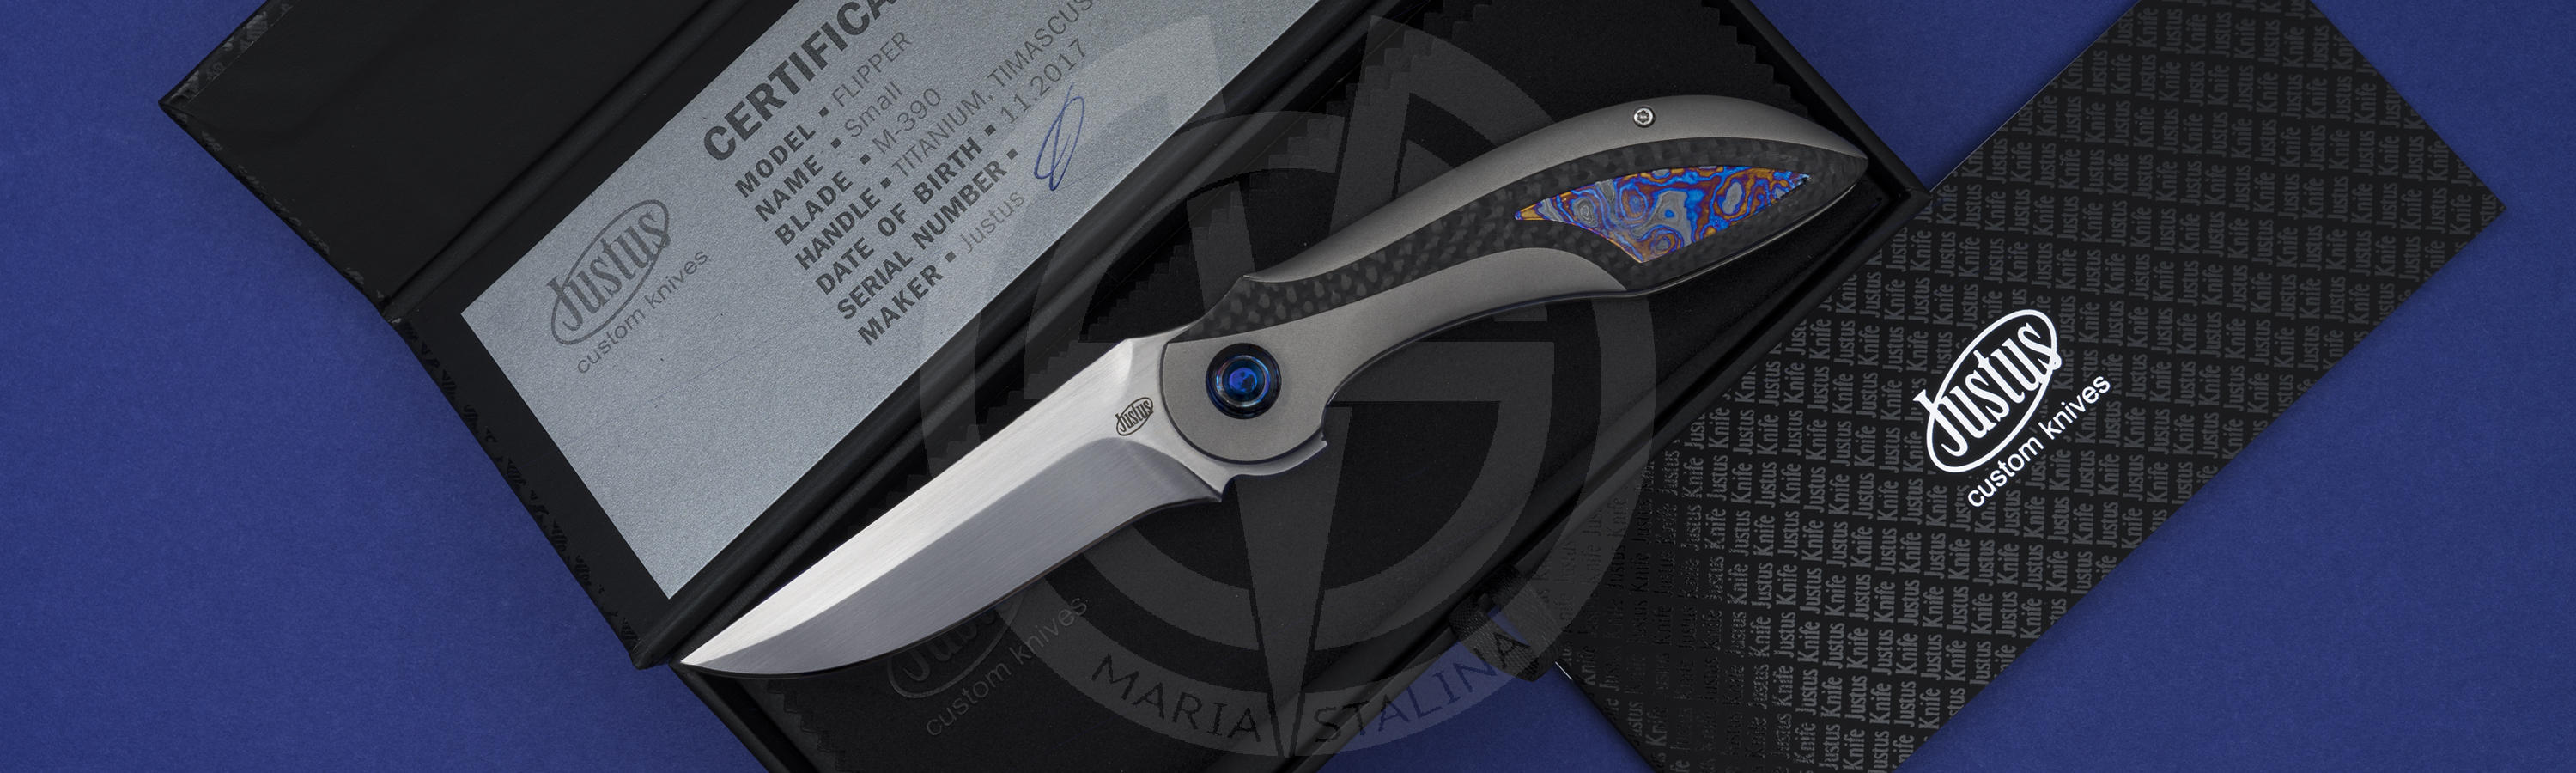 Alexey Dementiev's knife the Small